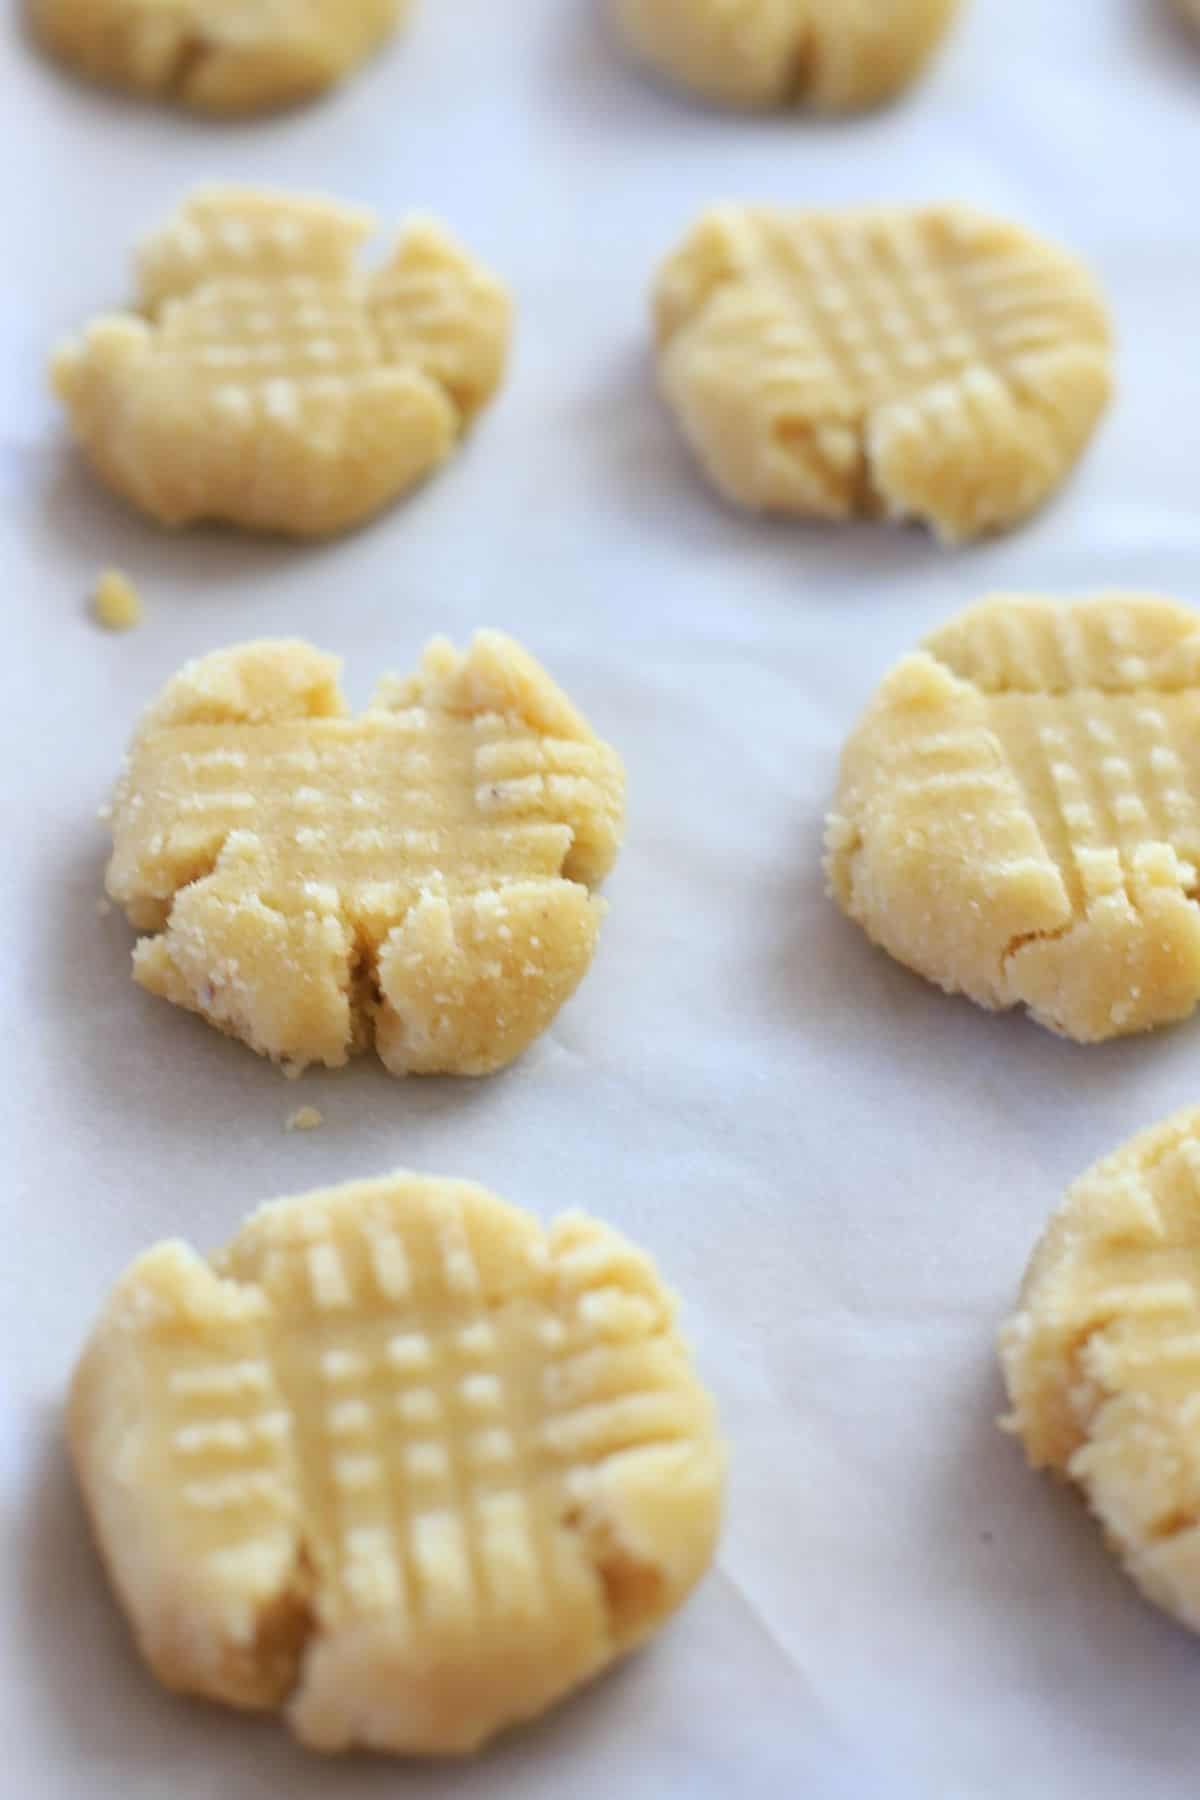 unbaked shortbread cookies on a parchment sheet